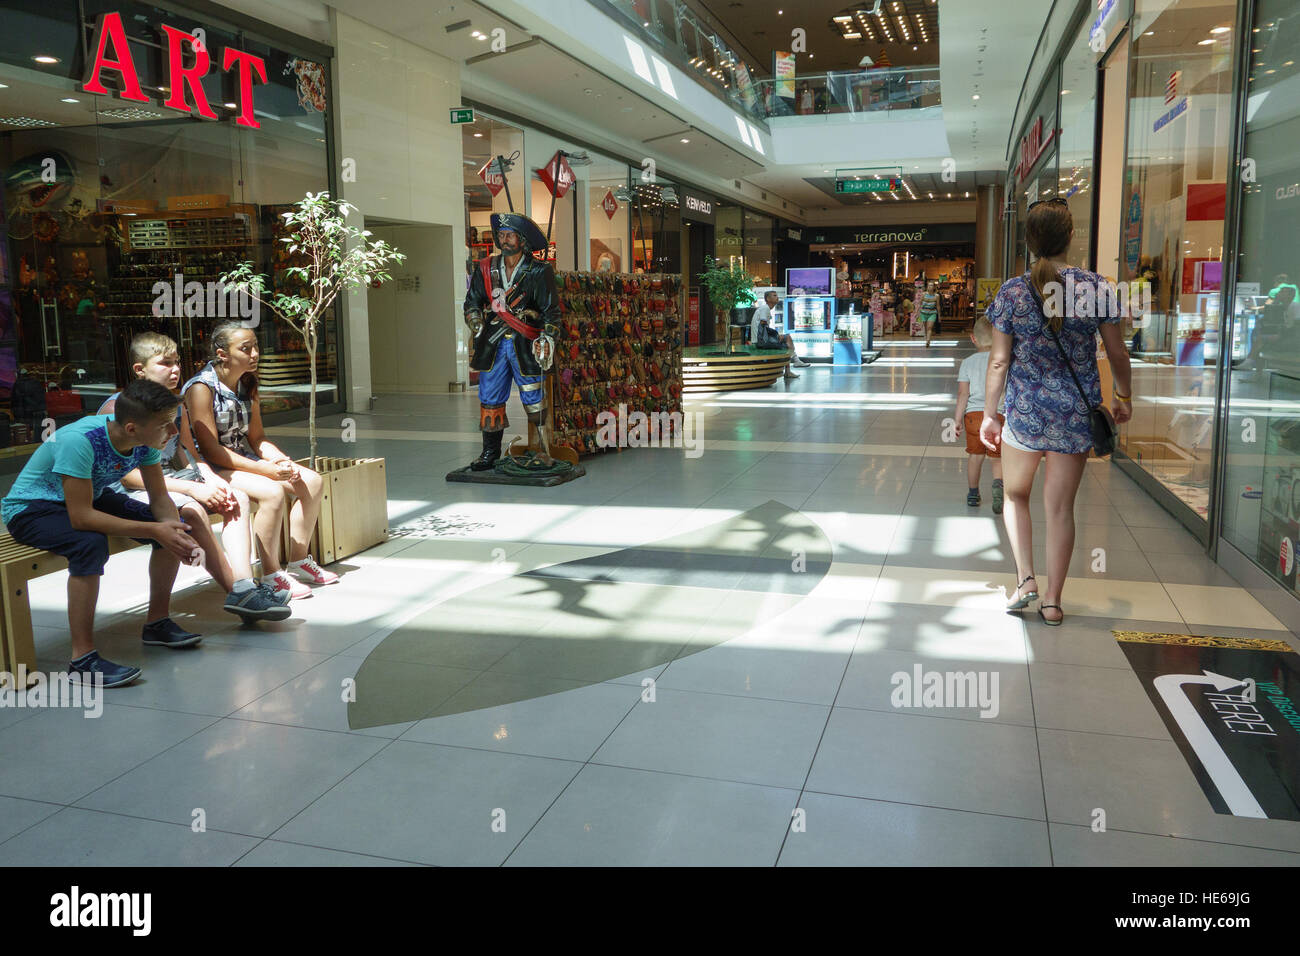 Burgas, Bulgaria - JUNE 23, 2016: Burgas Mall Galleria the largest shopping center in Bulgaria which hundreds of shoppers and tourists visit every day Stock Photo